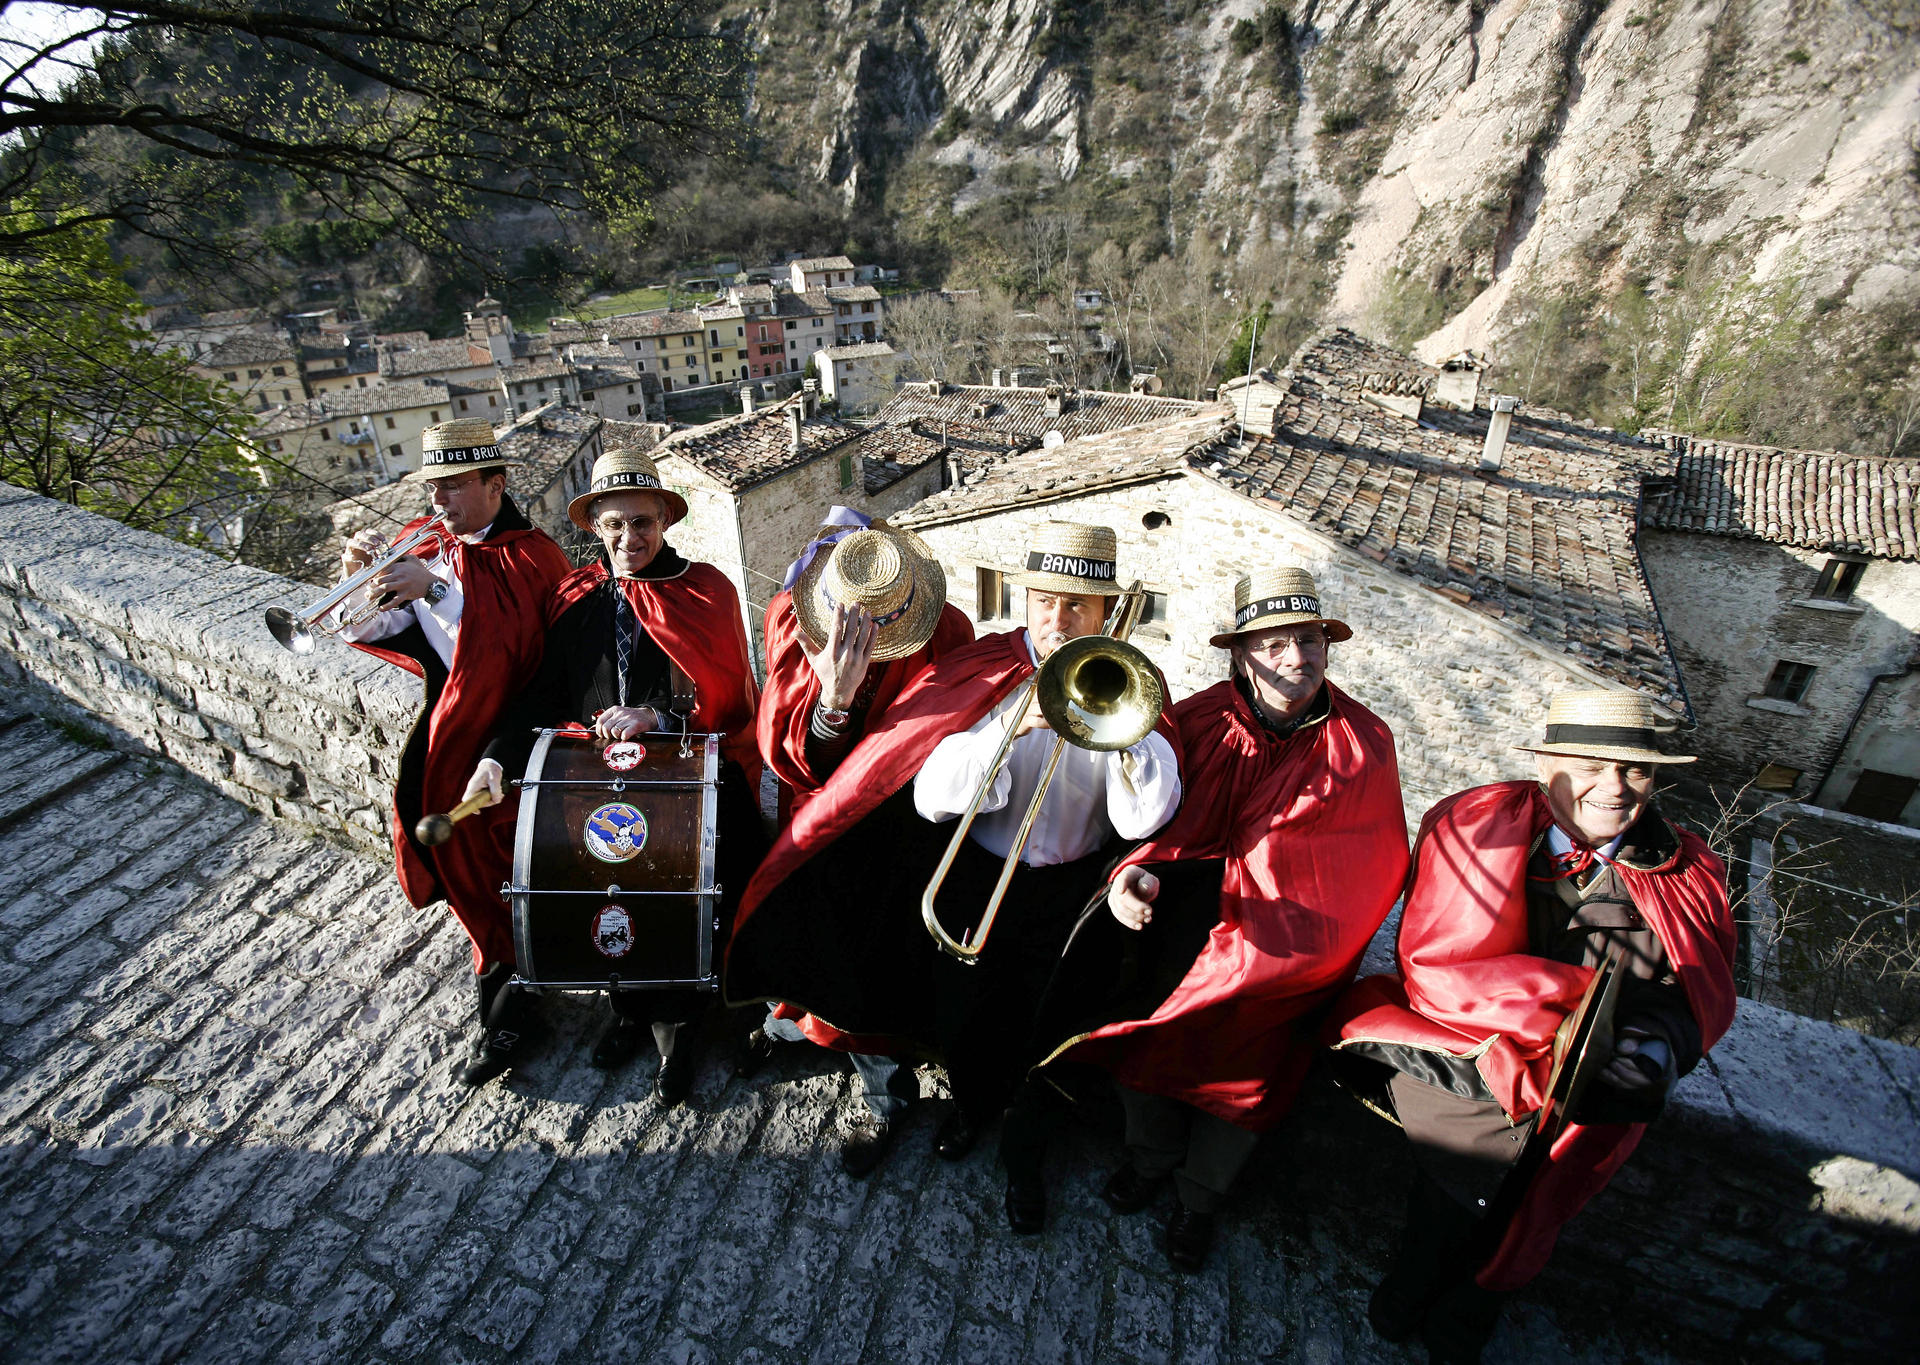 Members of the "ugly person's band" strike a chord in Piobbico, Italy. Photos: Reuters